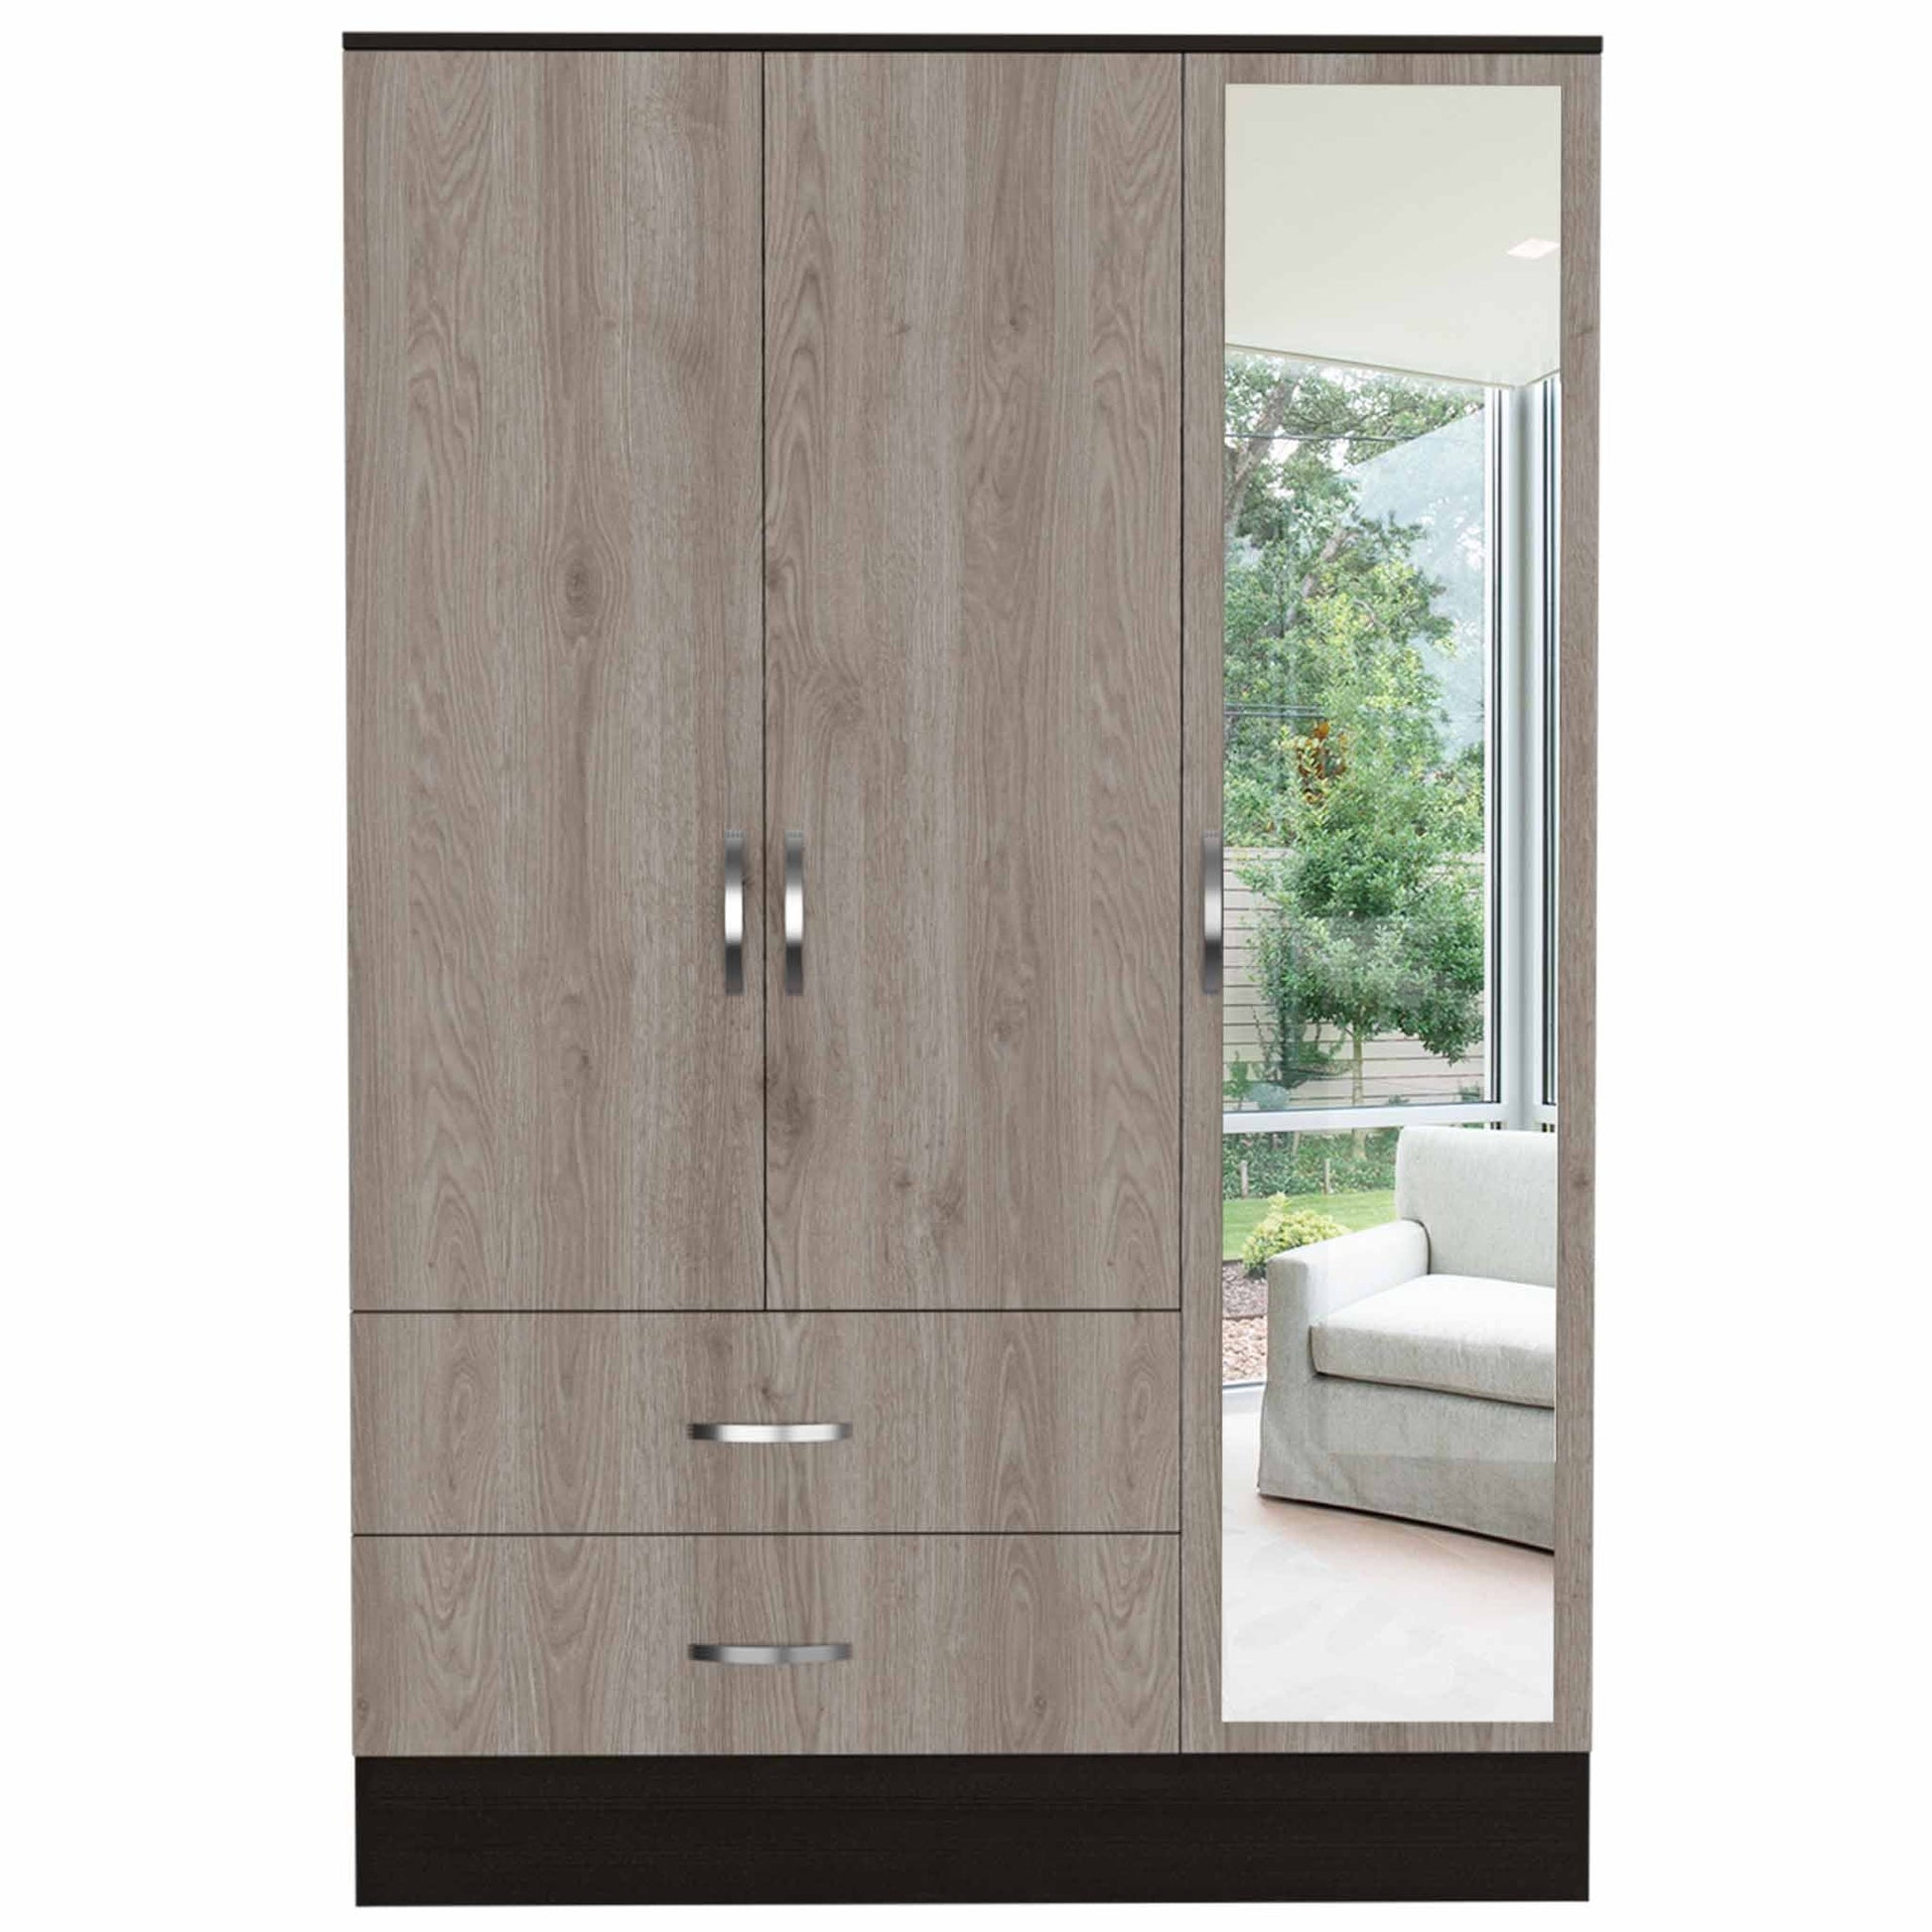 Mirrored Armoire by Draggo, Double Door Cabinet, Two Drawers , Rods, Black Wengue/ Light Gray Finish